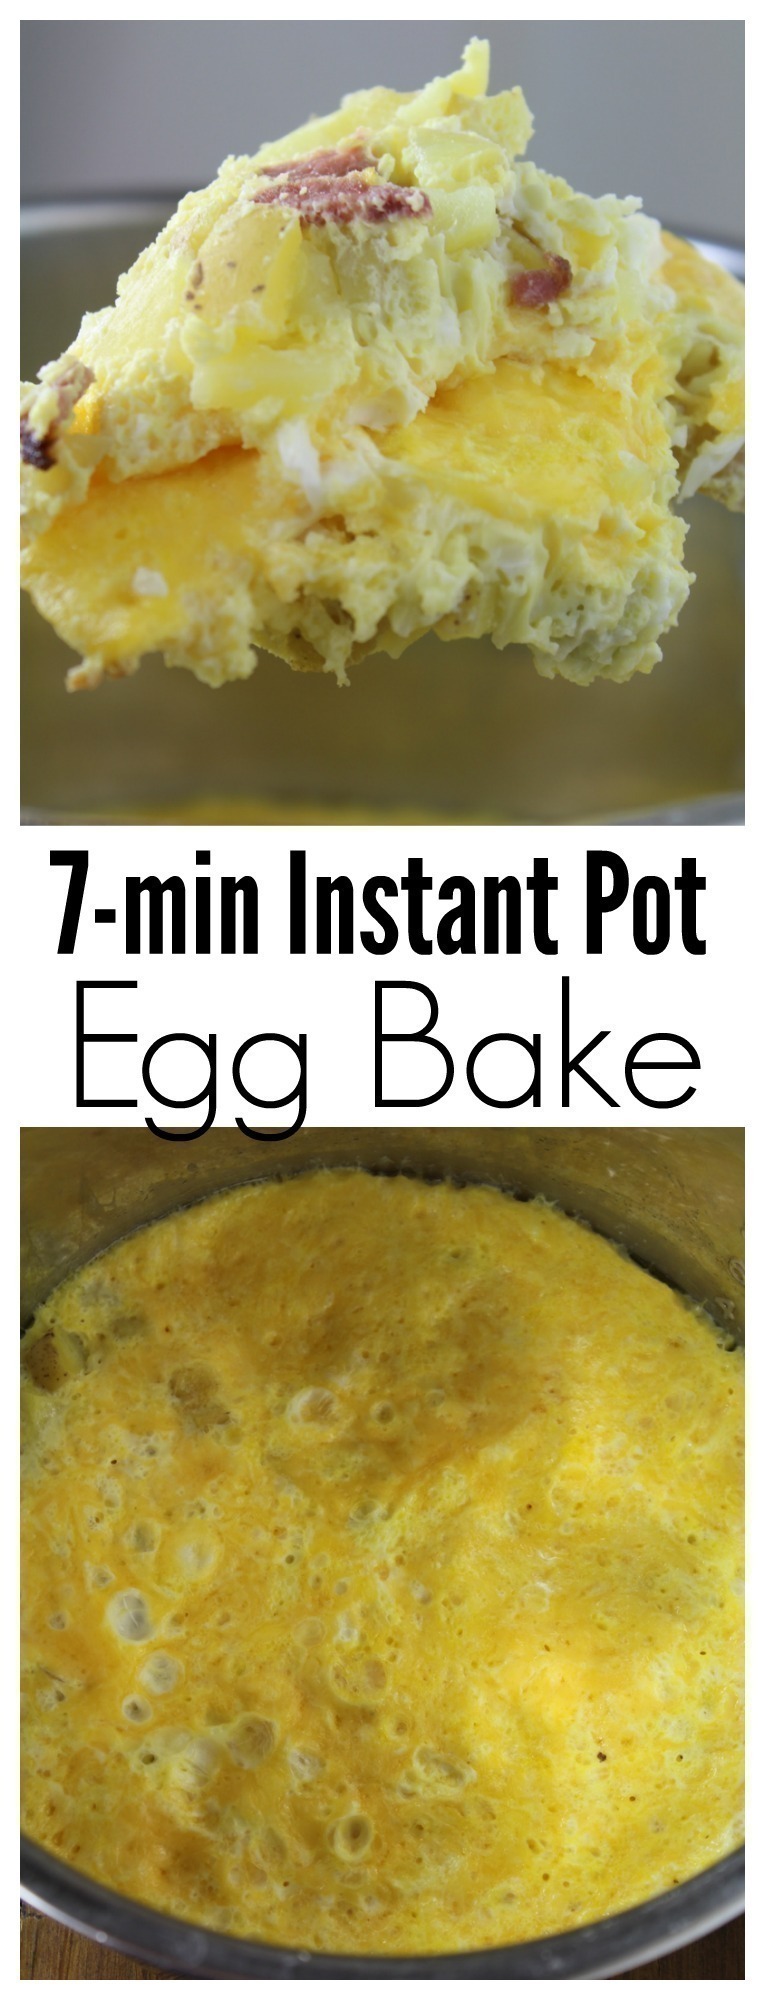 An easy one pot breakfast bake with eggs, potatoes, and meat, cooked in just minutes!